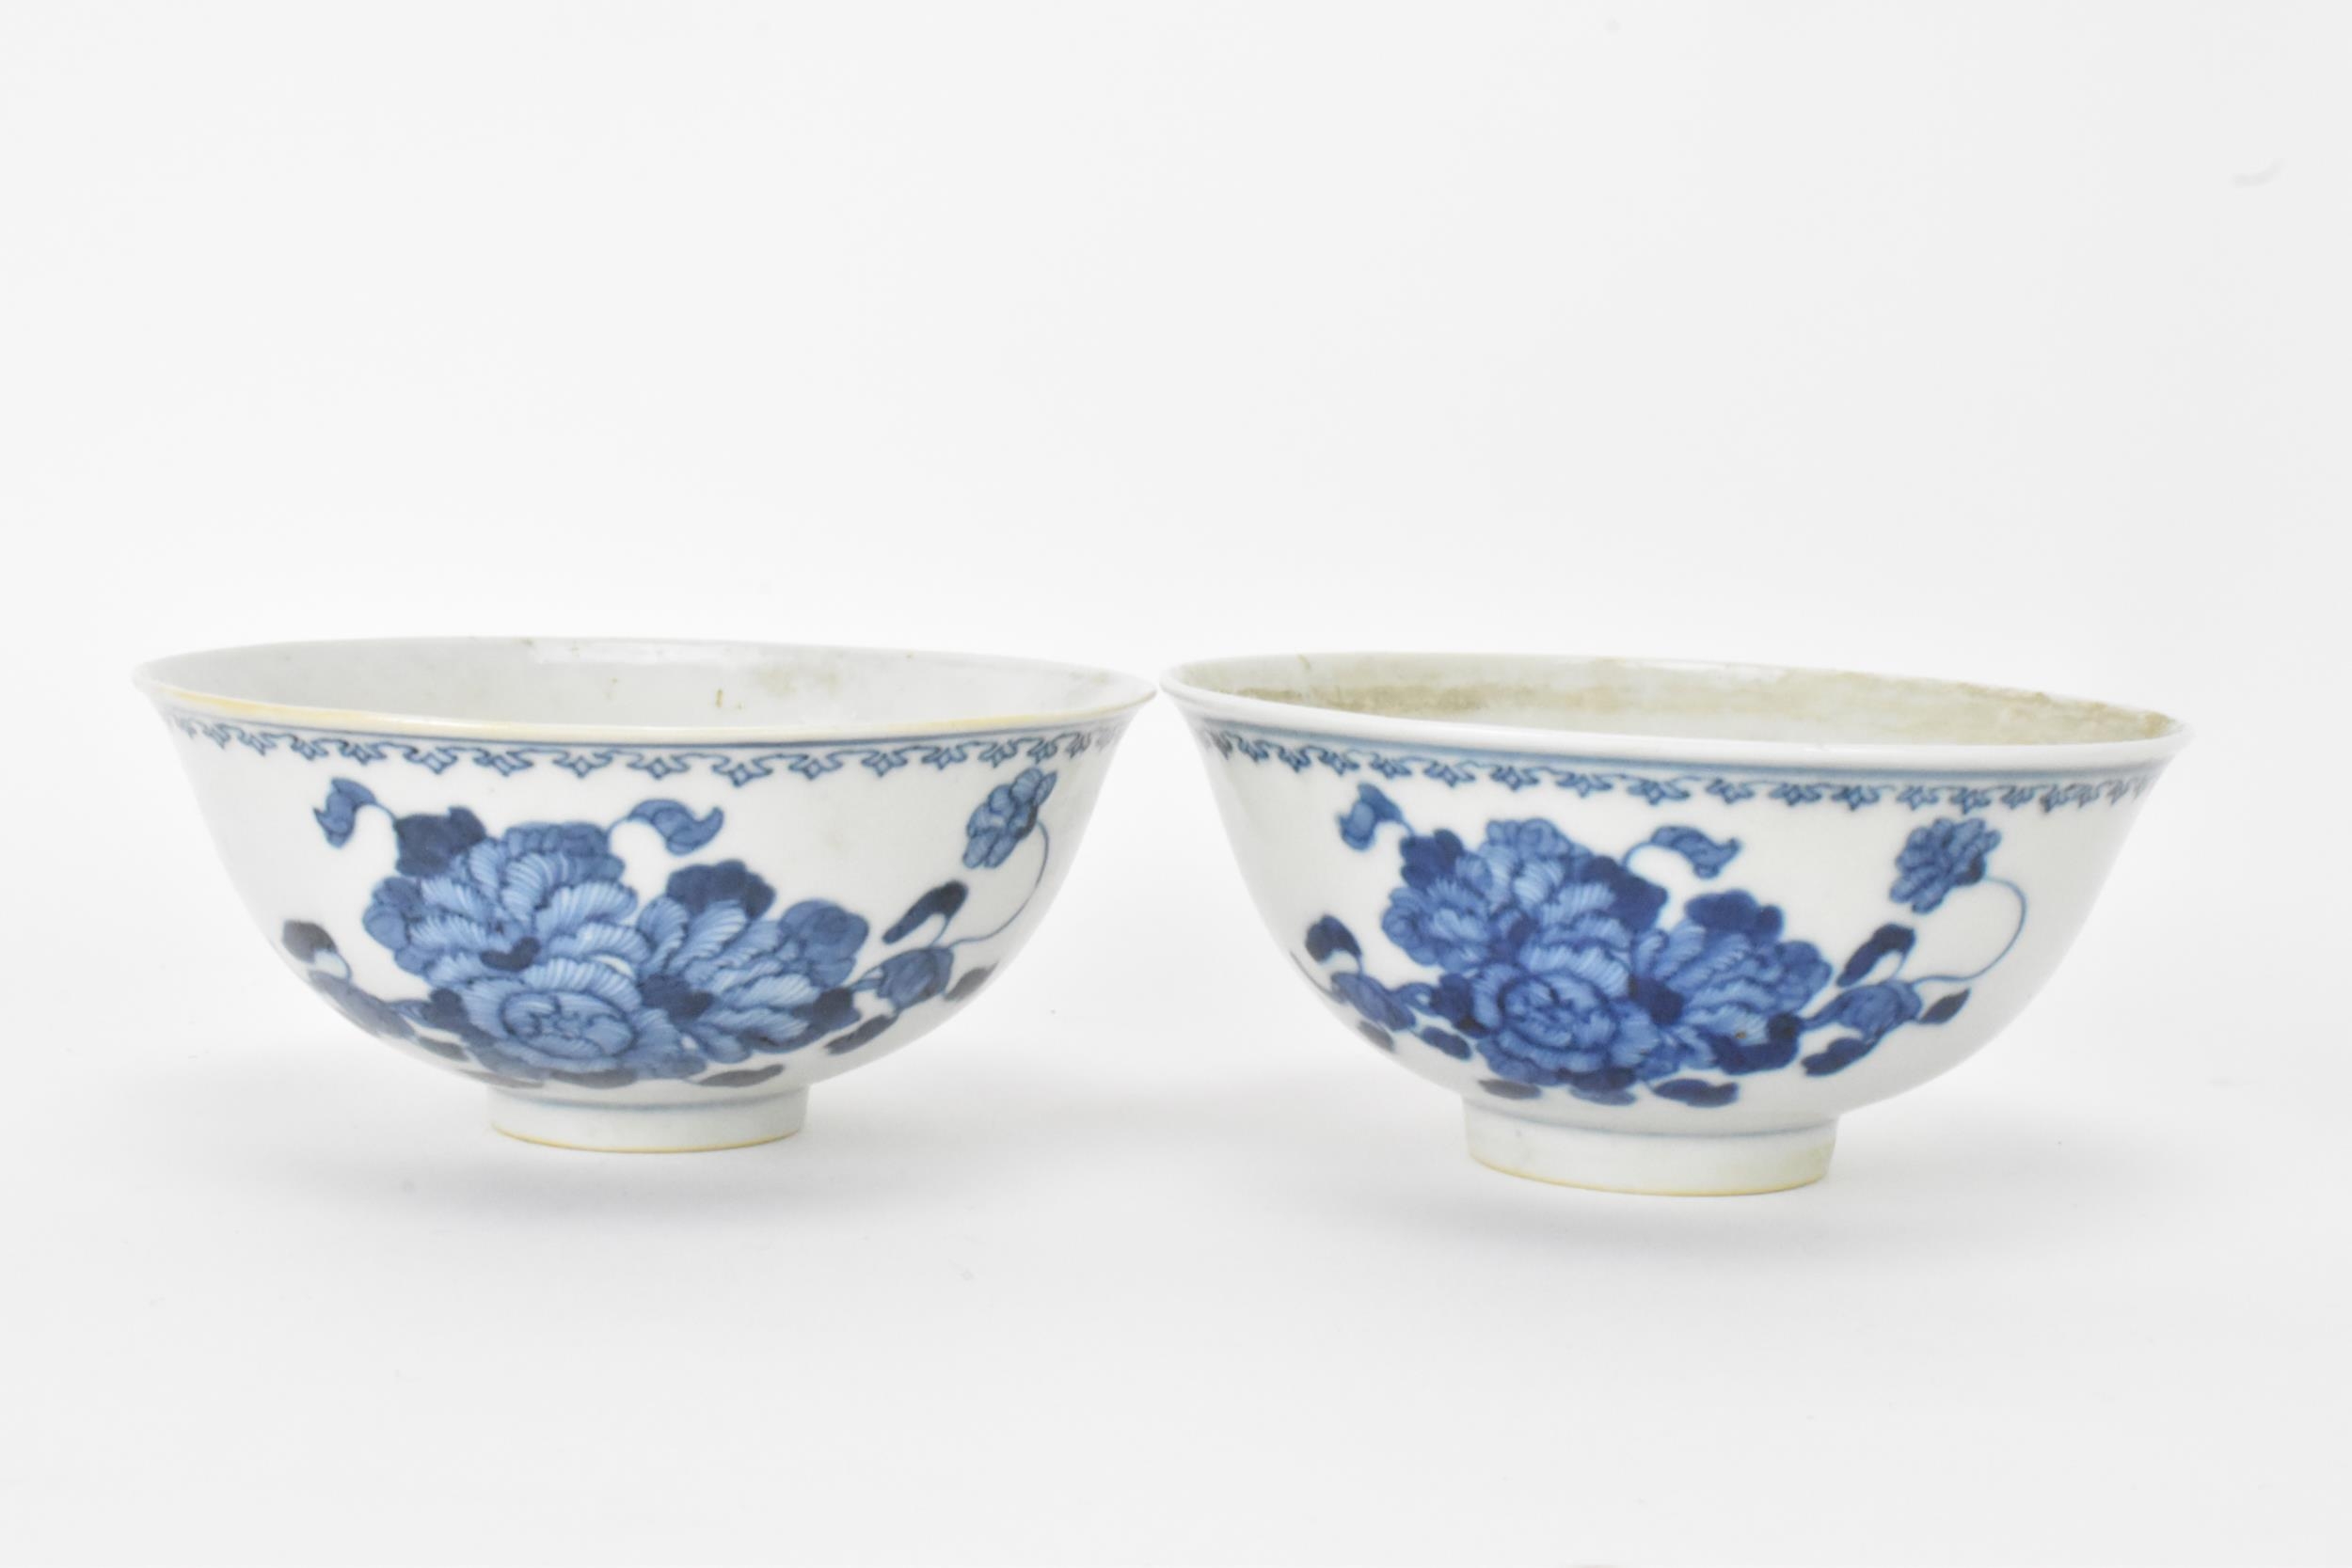 A set of four Qing dynasty, Guangxu period blue and white porcelain bowls, with floral decoration, - Image 7 of 9